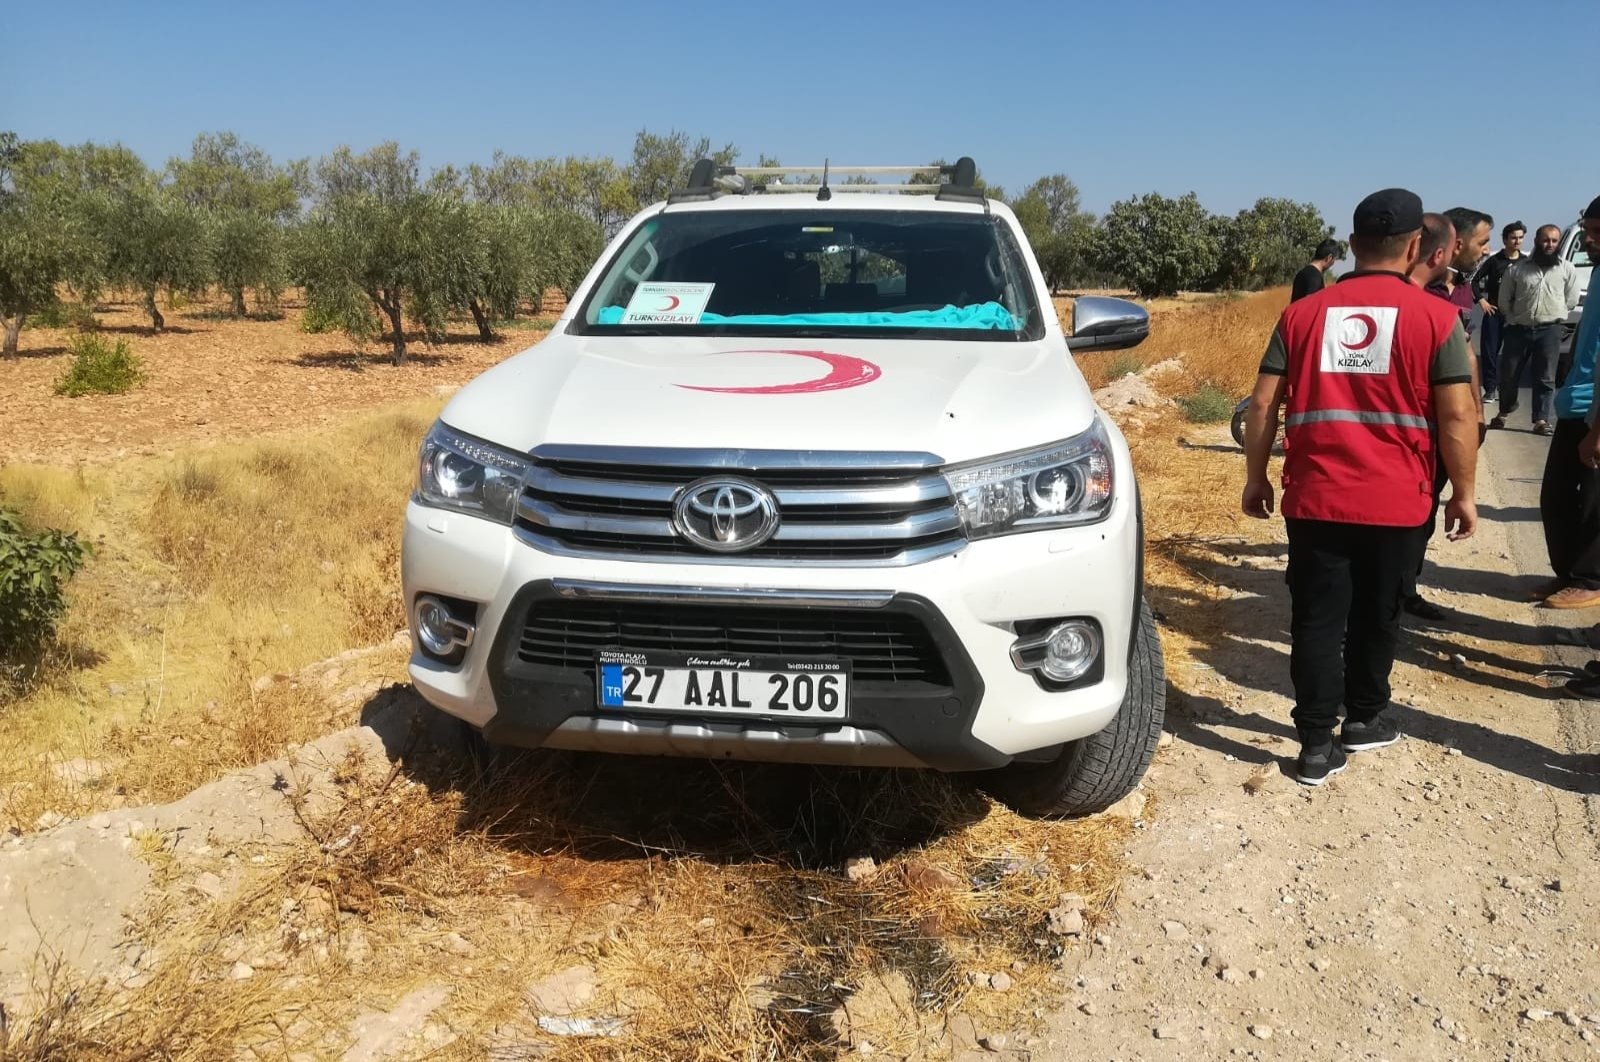 A vehicle belonging to Turkish Red Crescent is attacked in northern Syria by unknown individuals, killing one personnel, Sept.14, 2020. (IHA Photo)